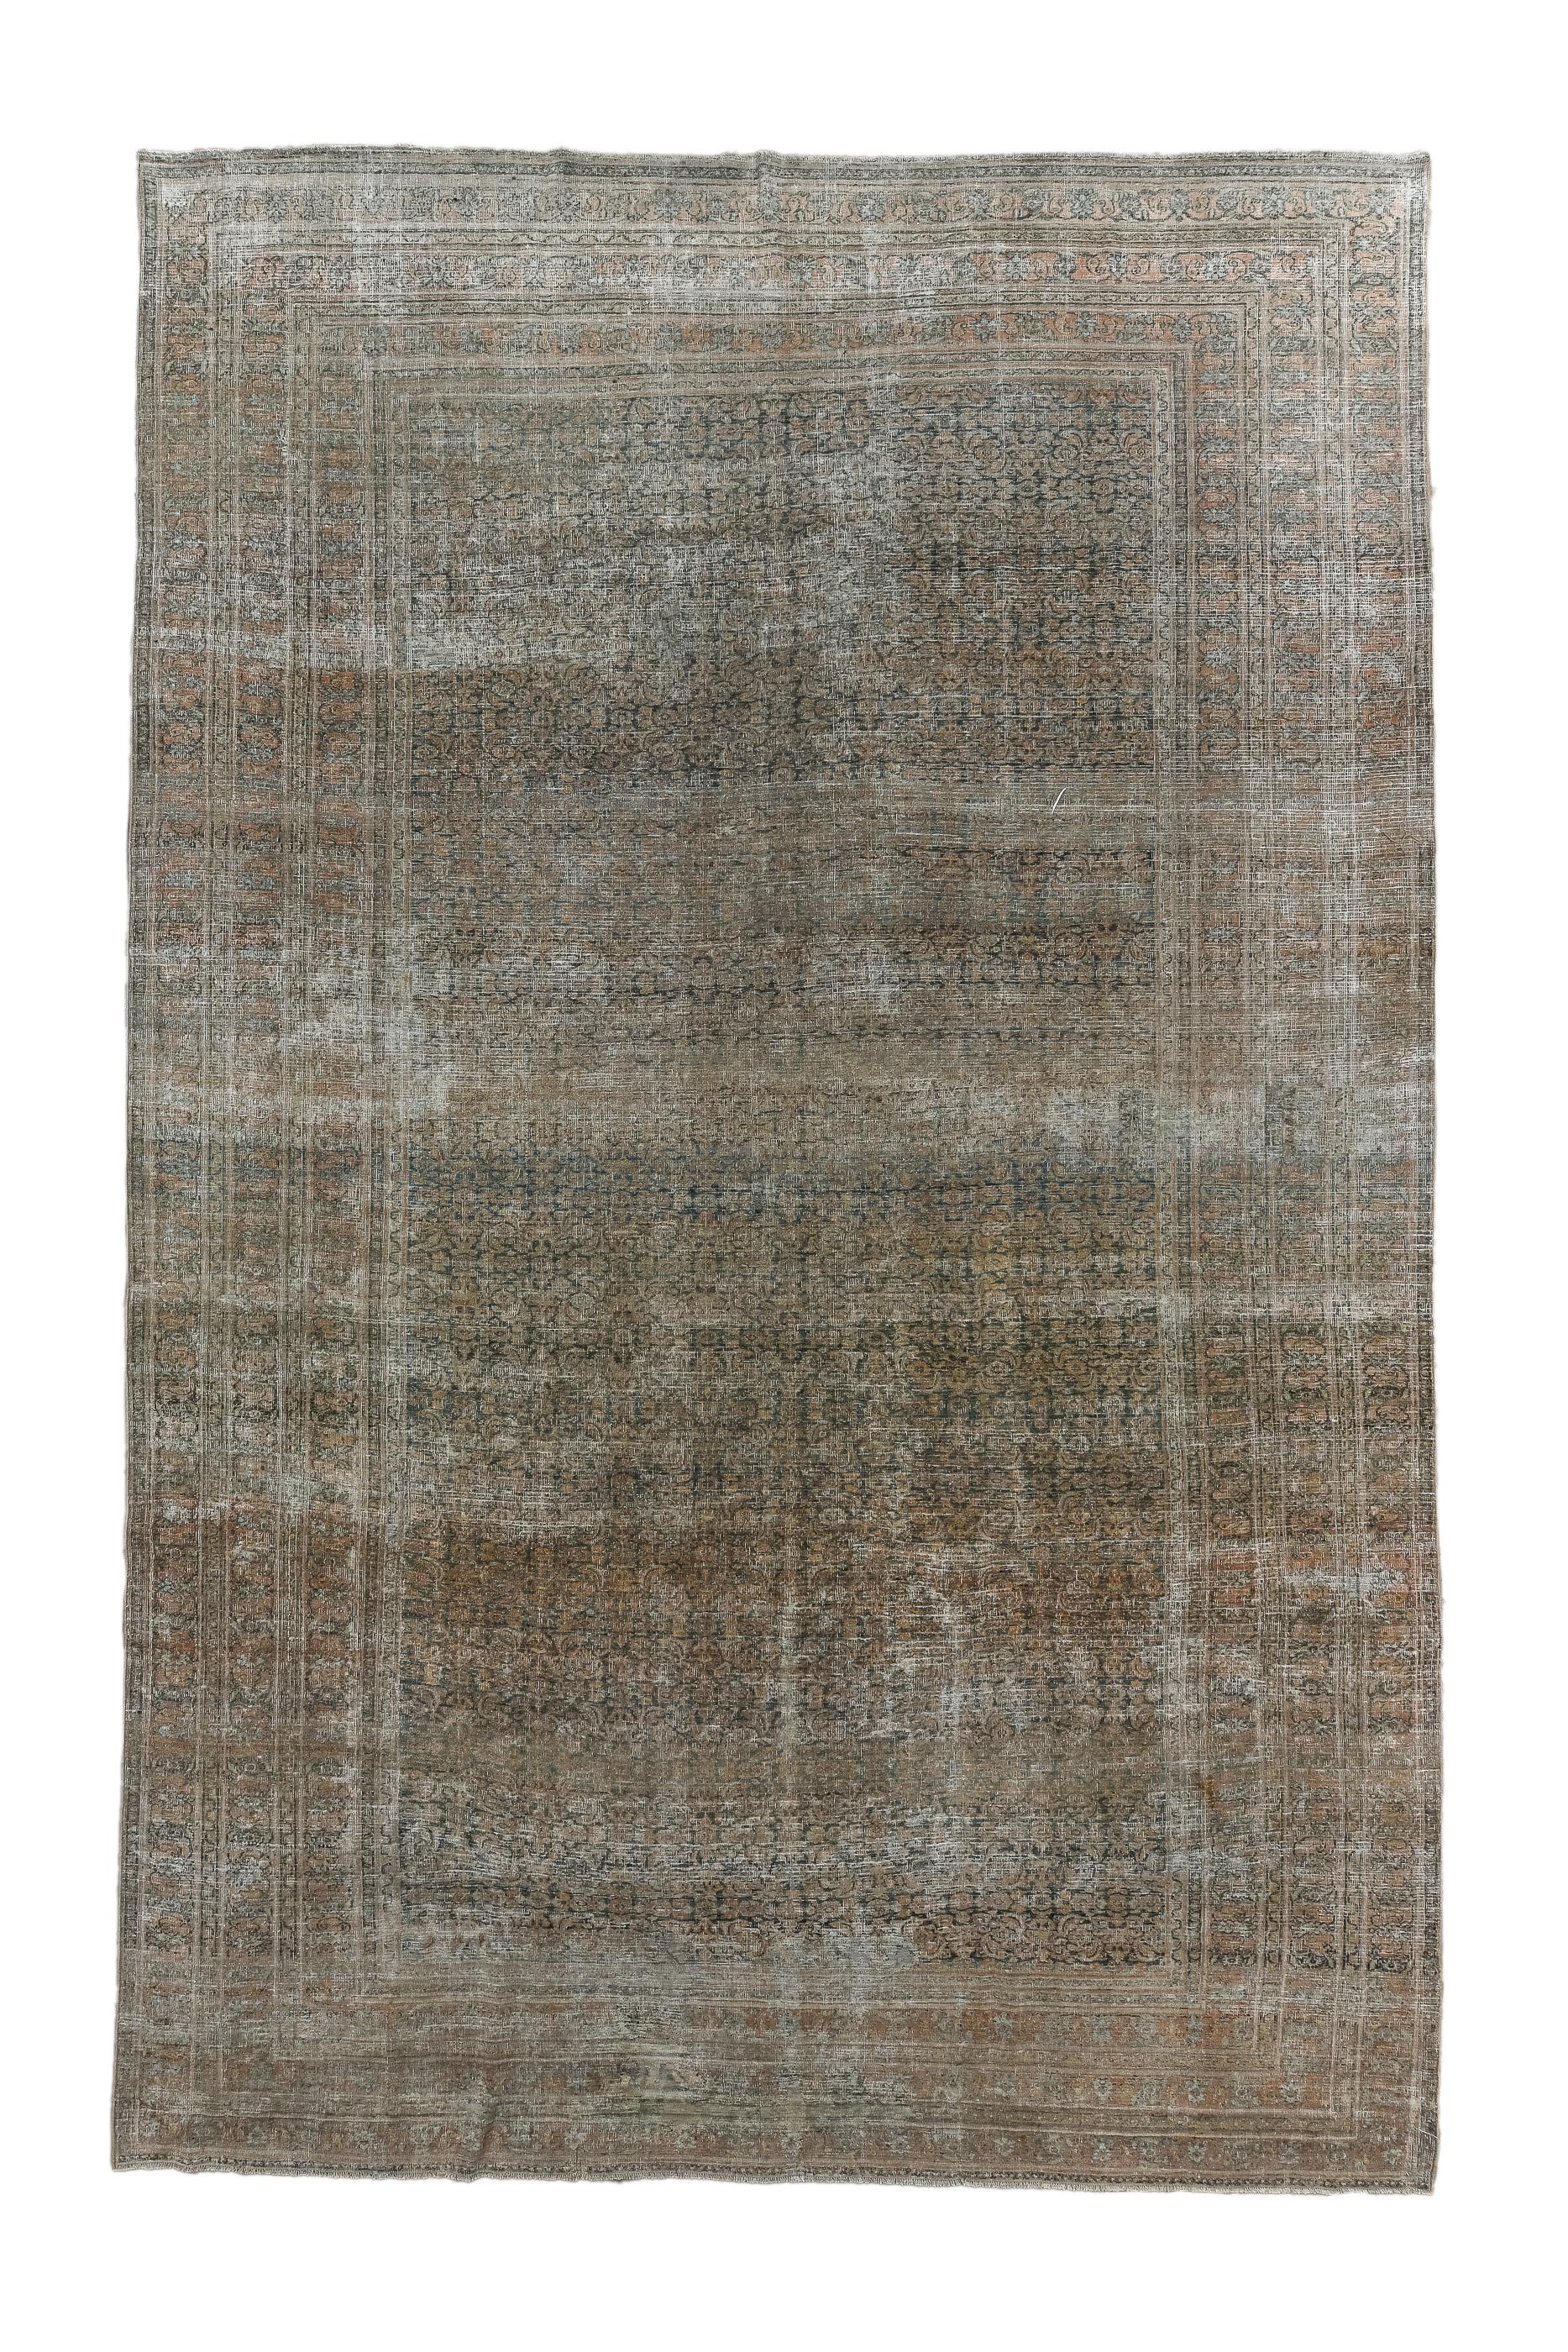 This linearly distressed city piece shows a compact allover Herati design on a slate field. The off white foundation visibly adds another allover tone. The three wide borders all show similar small botehs. Soft wool, cotton foundation. 

Rug